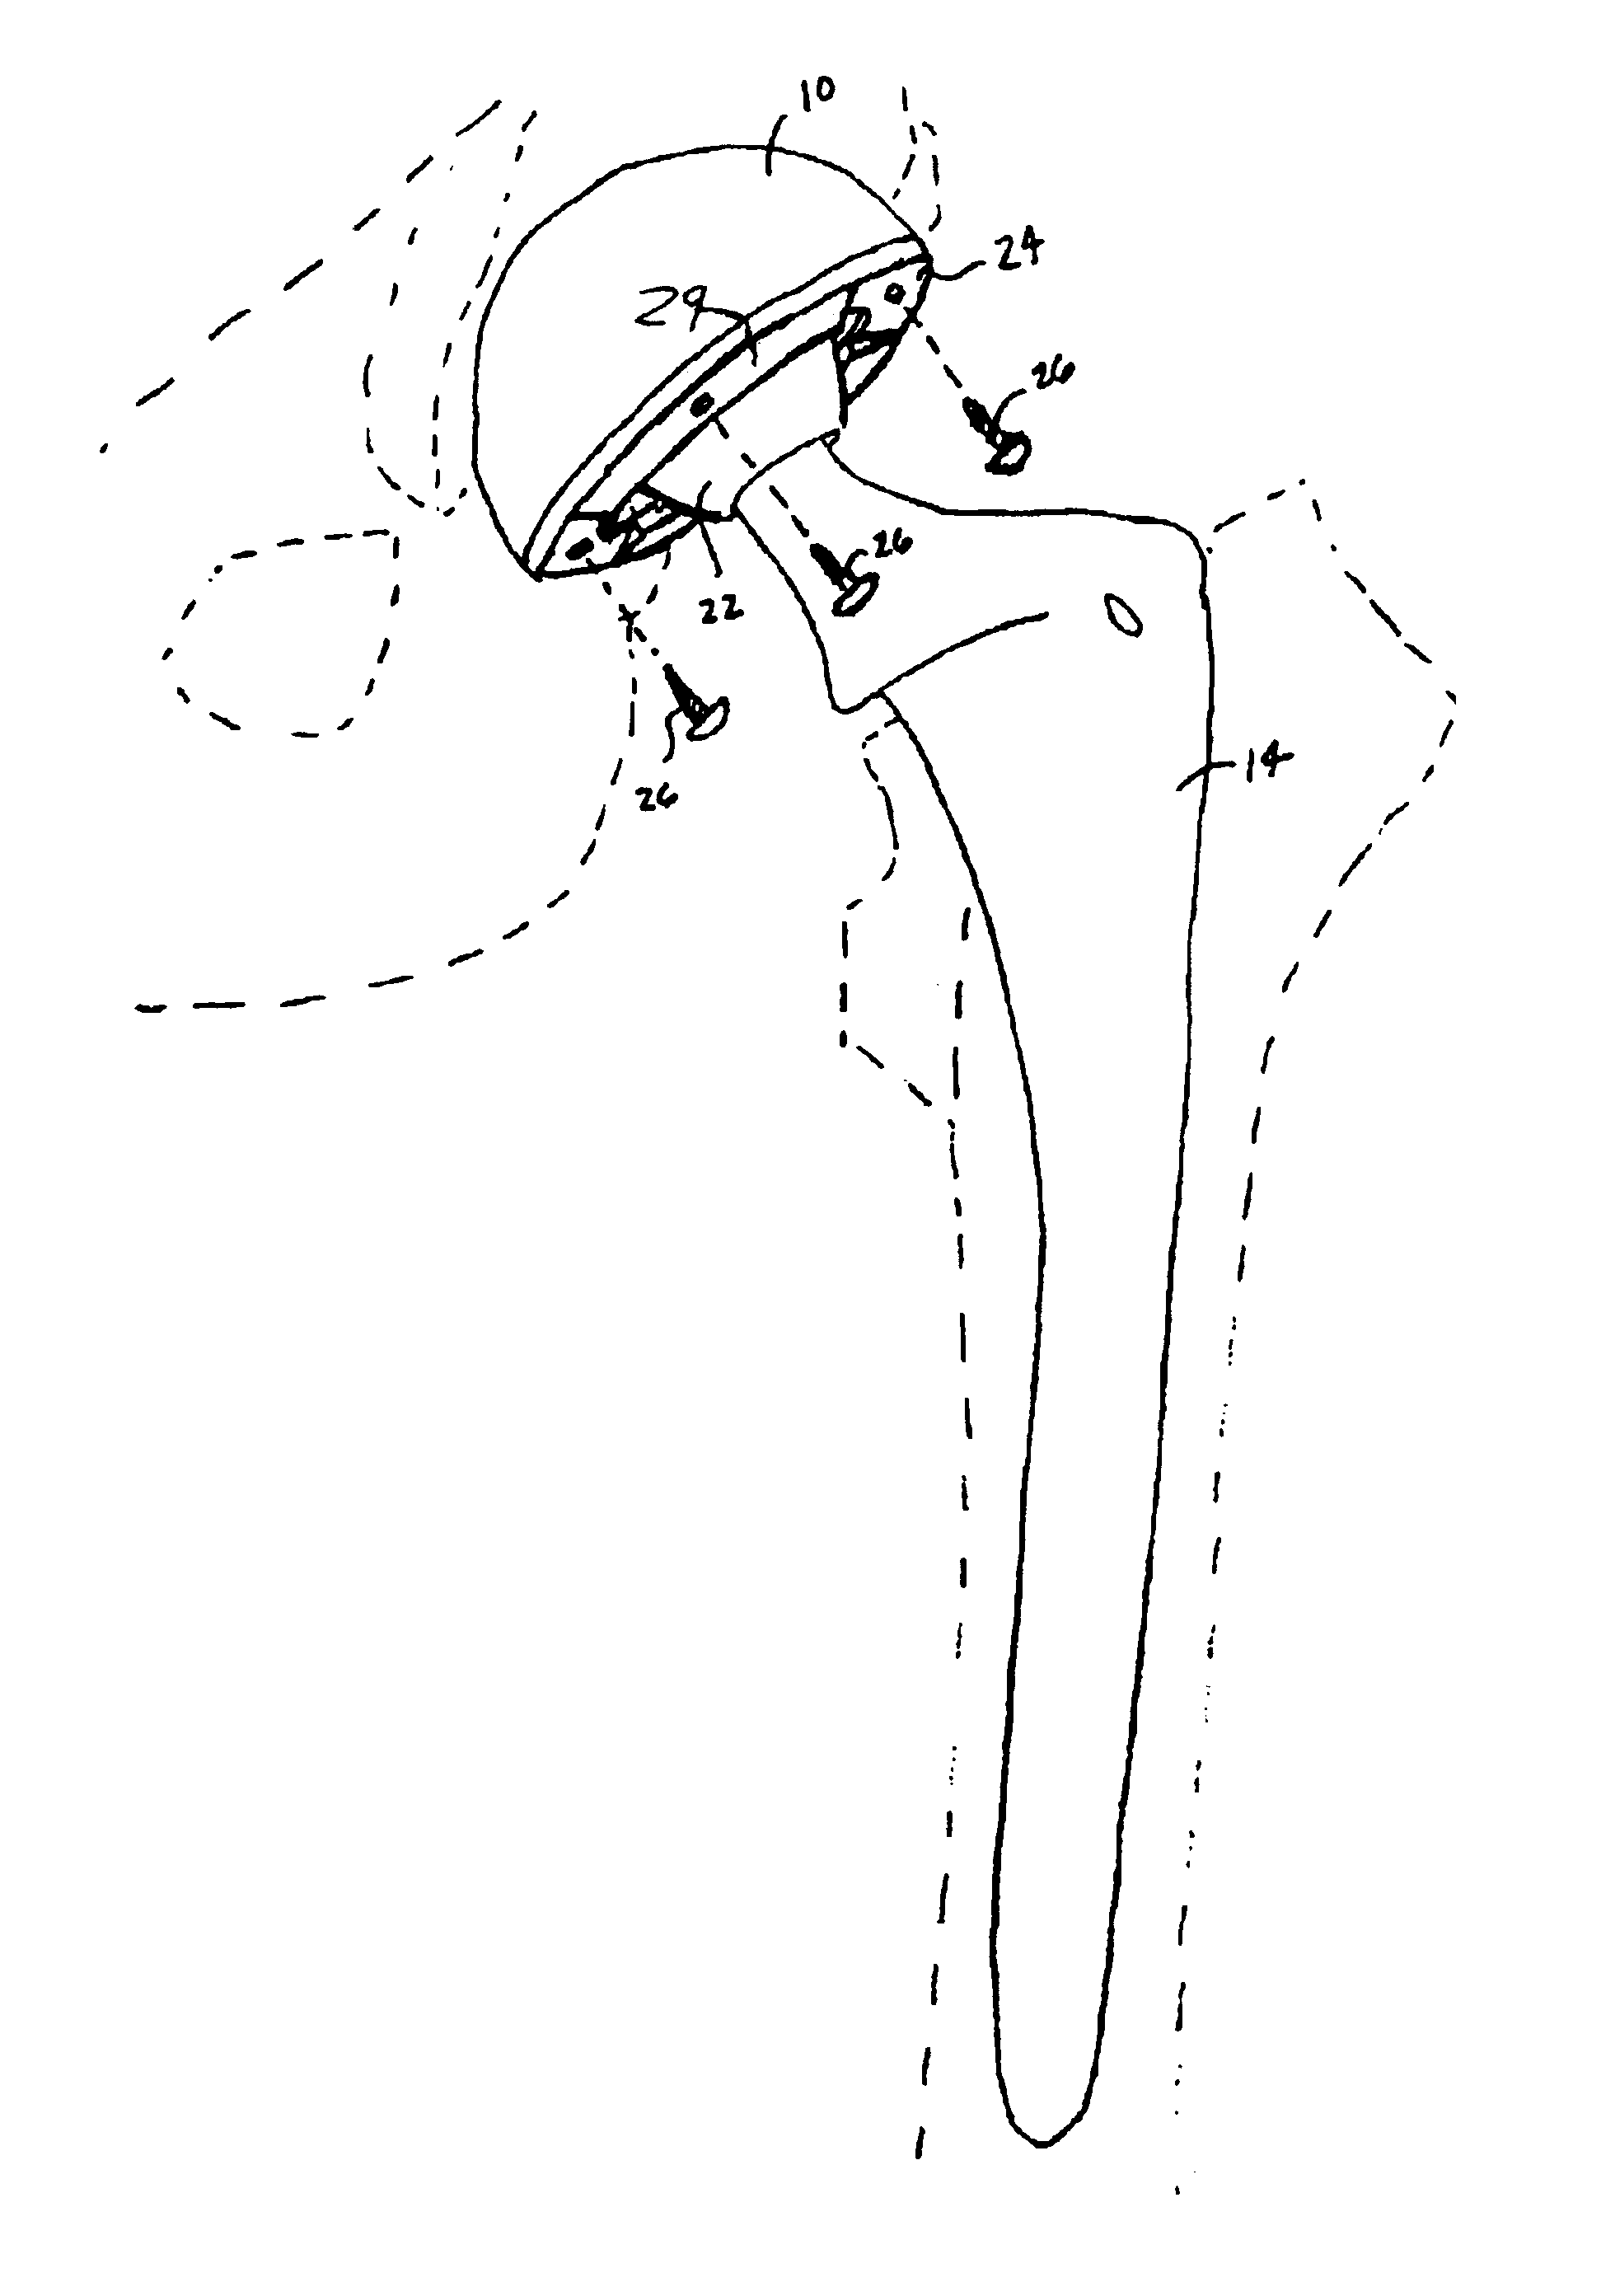 Biologically reabsorbable acetabular constraining components and materials for use with a hip replacement prosthesis and bioreabsorbable materials to augment hip replacement stability and function